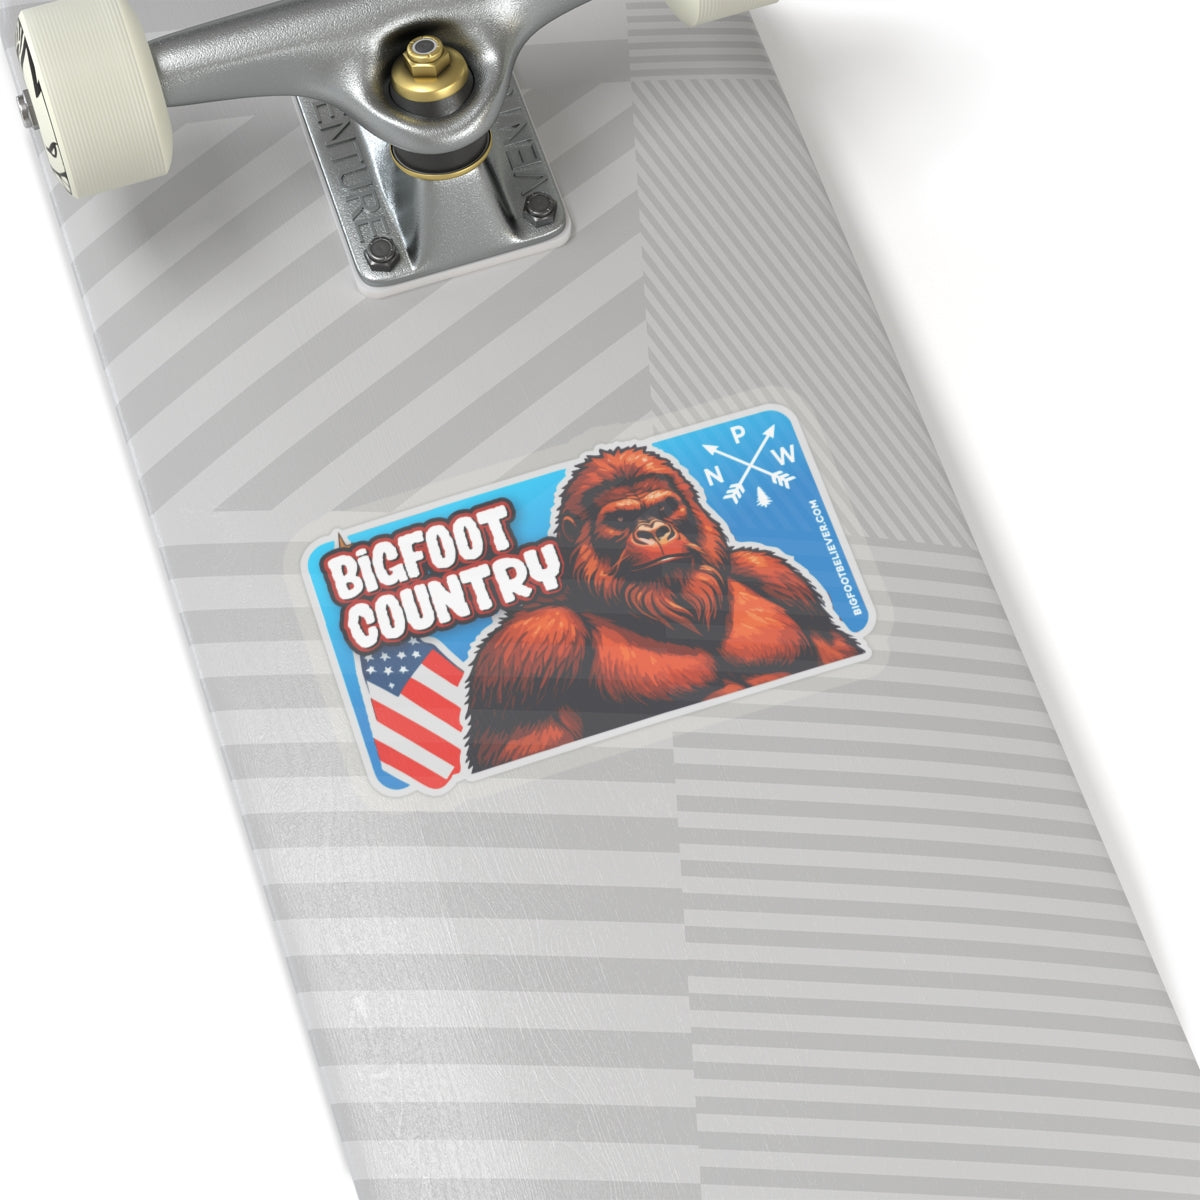 Bigfoot Country Kiss-Cut Stickers